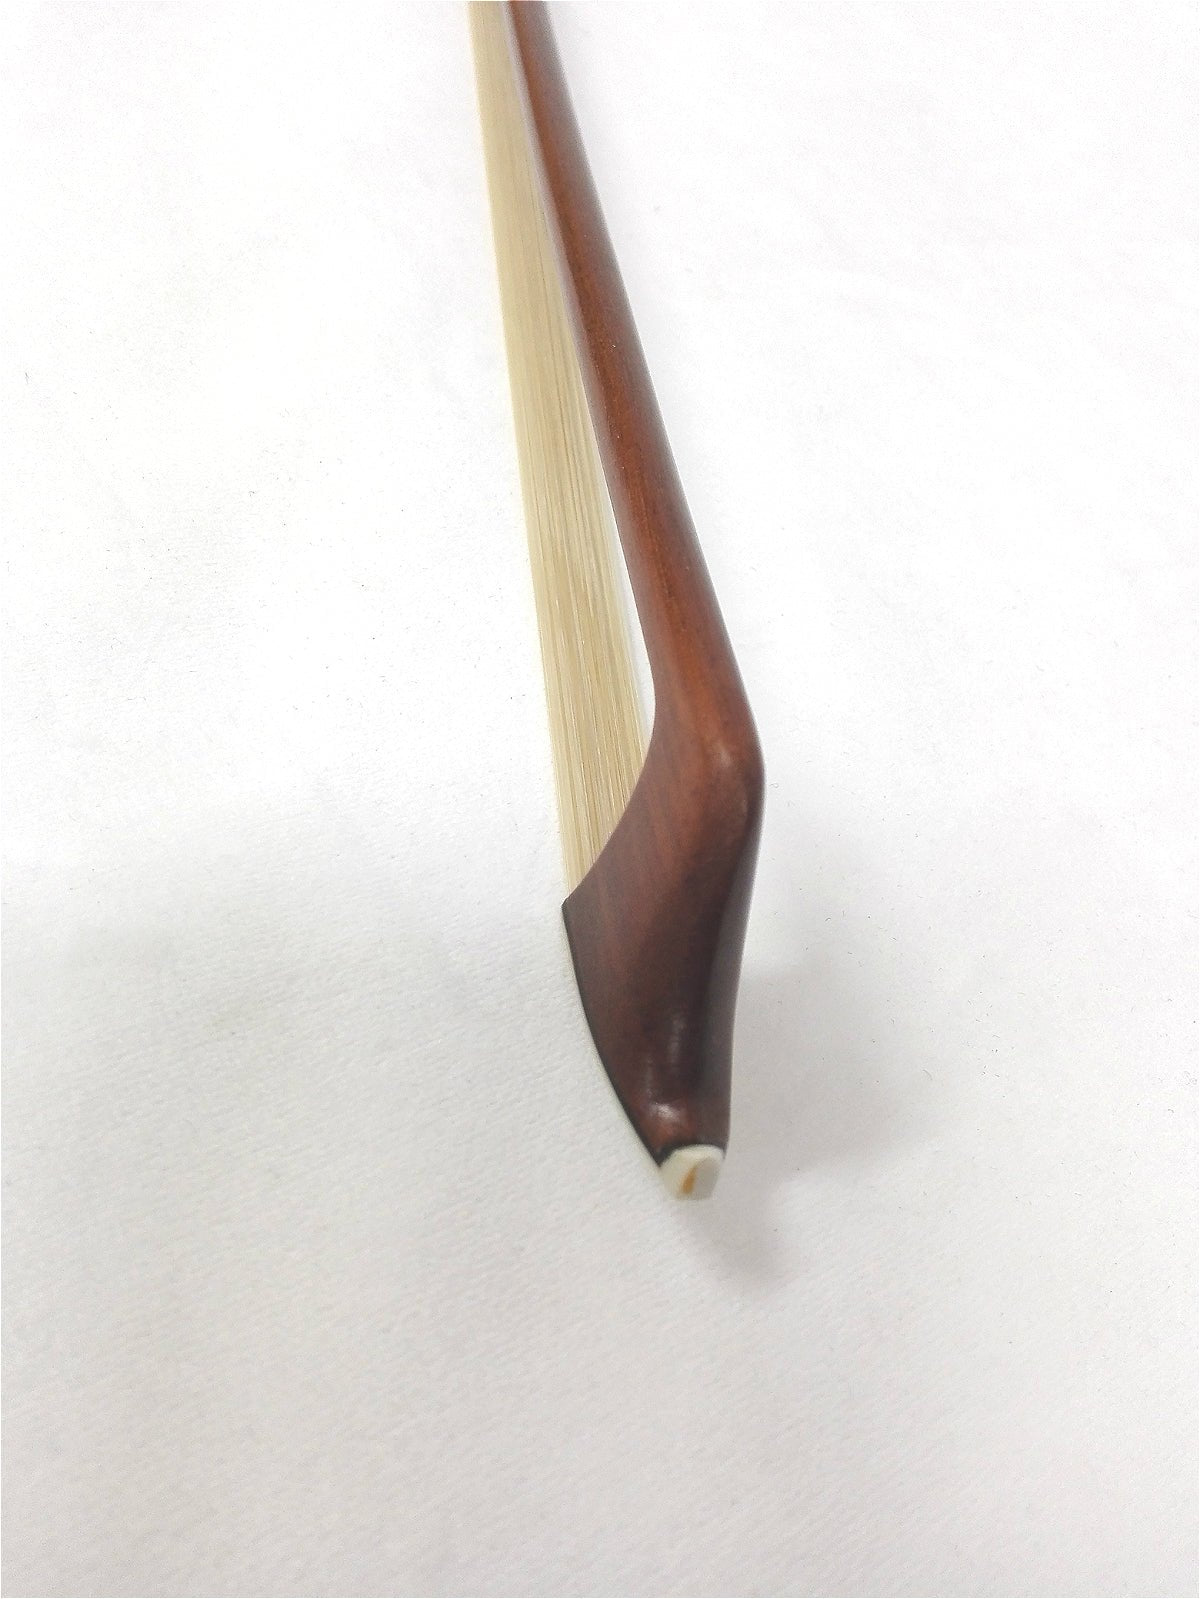 Symphony FC080 4/4 Size Cello Bow, Brazil-wood, Round Stick, Real Horse Hair